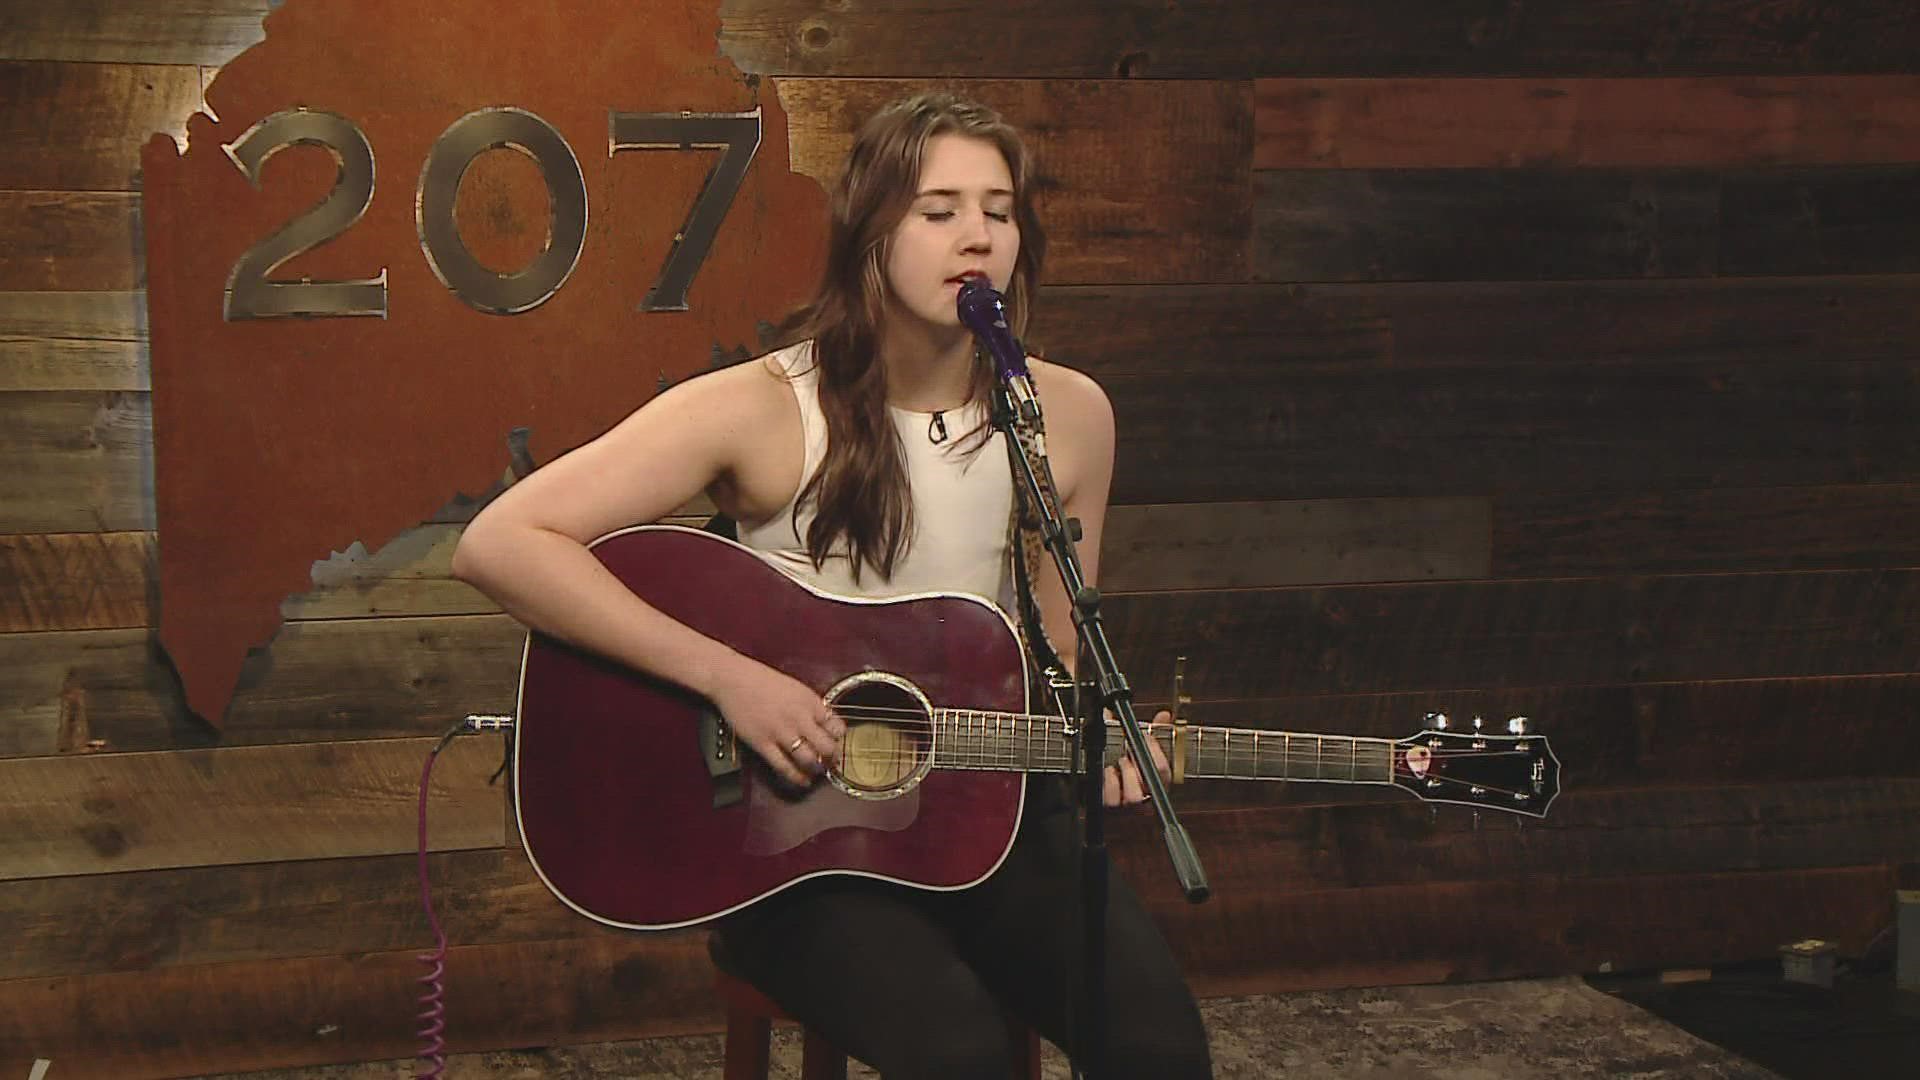 Maine singer and songwriter Holly Clough stops by 207 to perform new music.